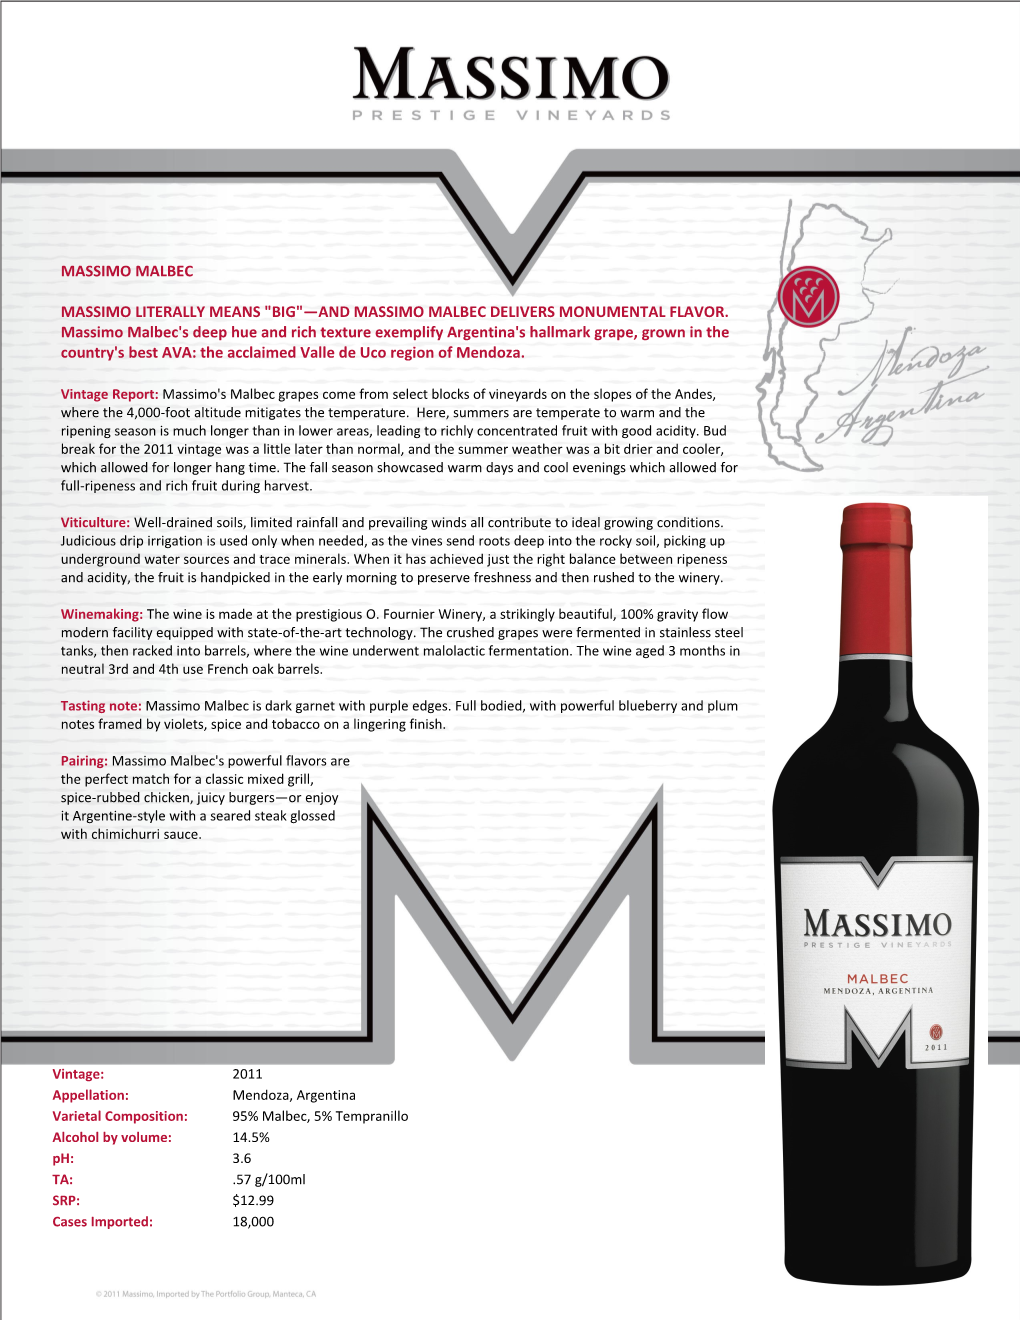 Massimo Literally Means Big and Massimo Malbec Delivers Monumental Flavor